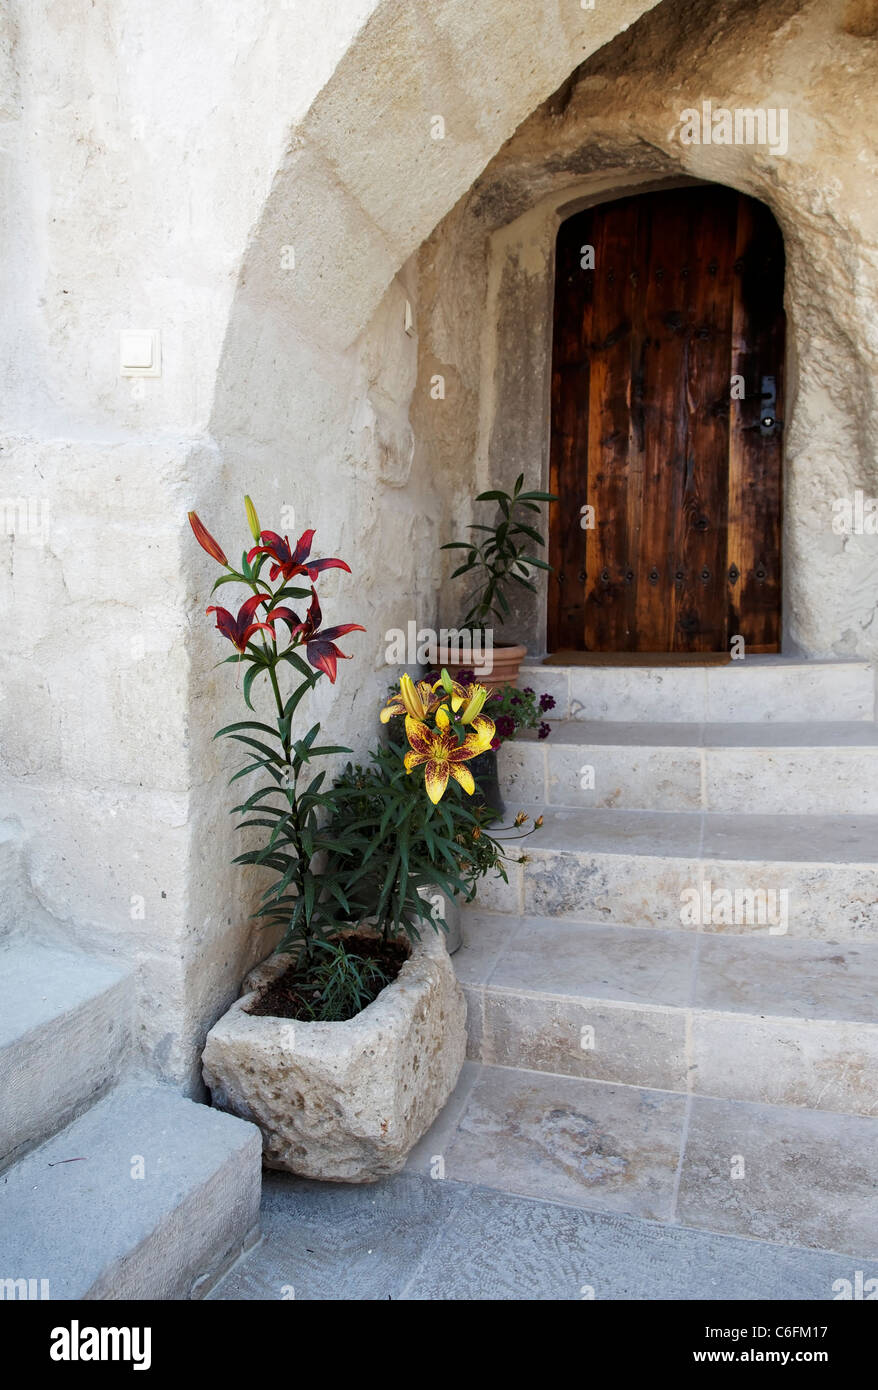 Exterior design of limestone cave stone flower pots linning steps to doorway through an archway, portrait, crop space, copy Stock Photo